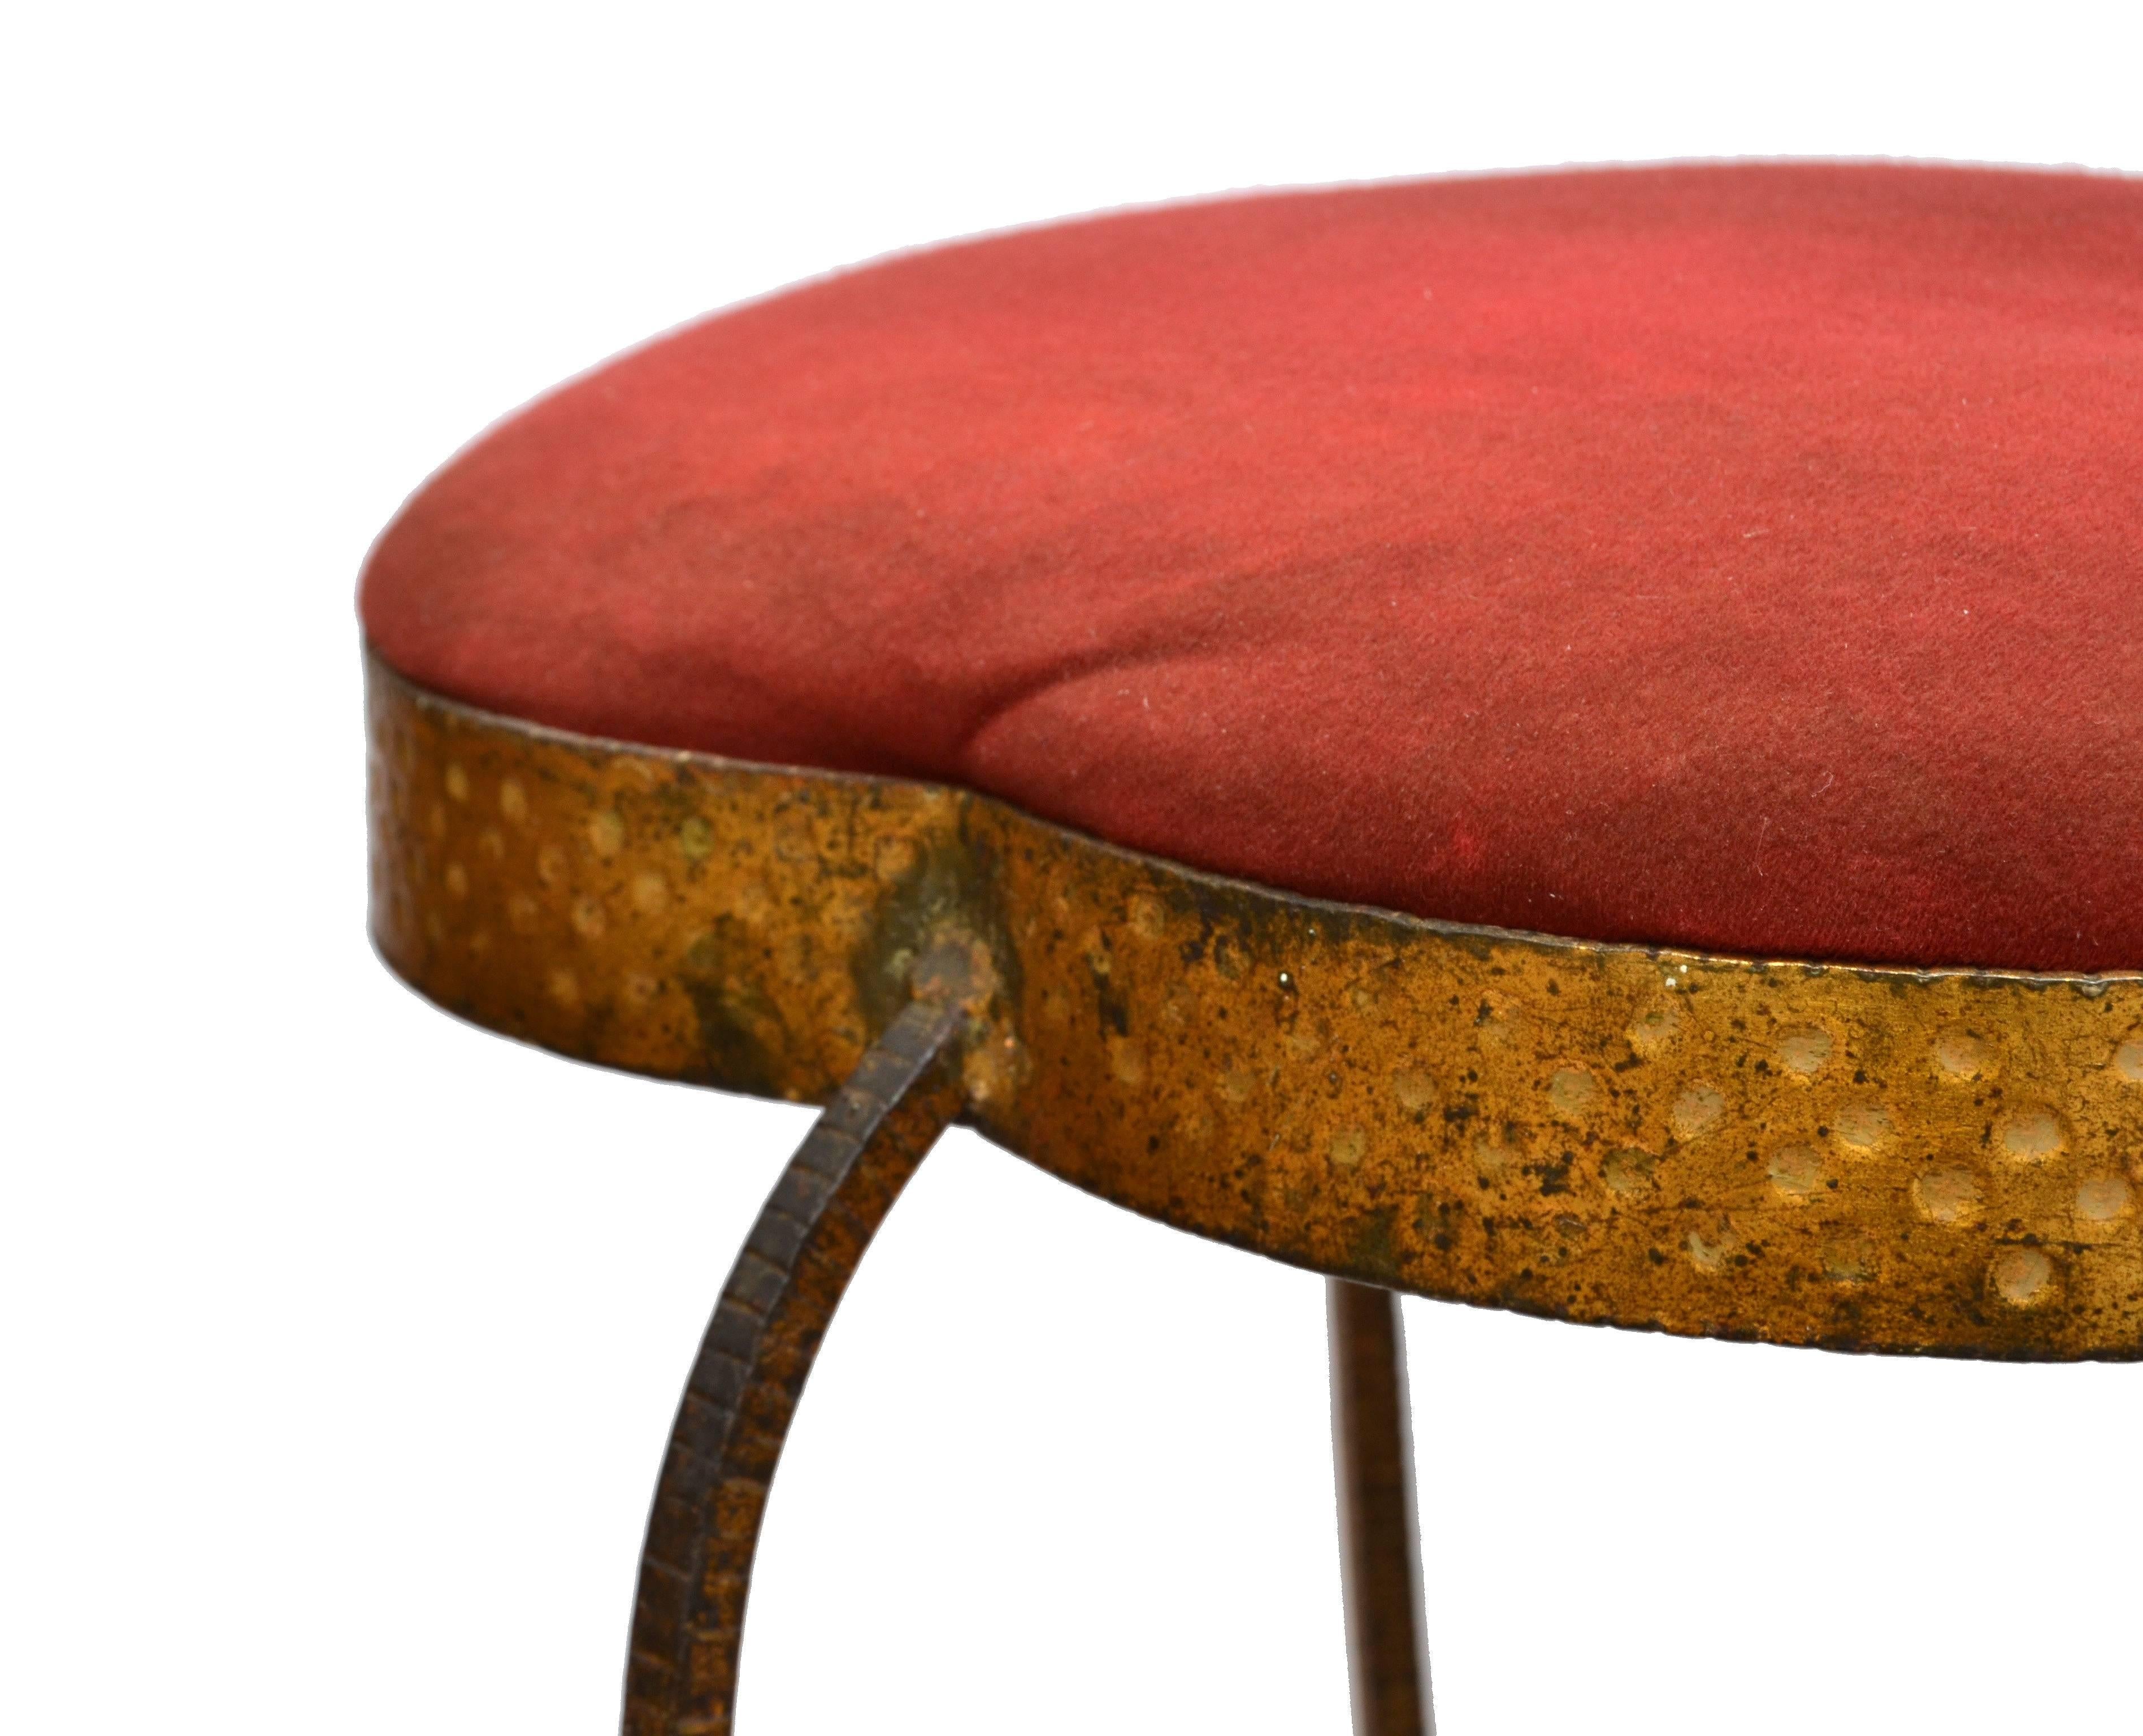 Graceful vanity stool made out of gold leaf hand hammered wrought iron with red upholstery by Pier Luigi Colli.
In original vintage condition.
We have also available in our other listings mirror, umbrella stand, consoles & chair.
 